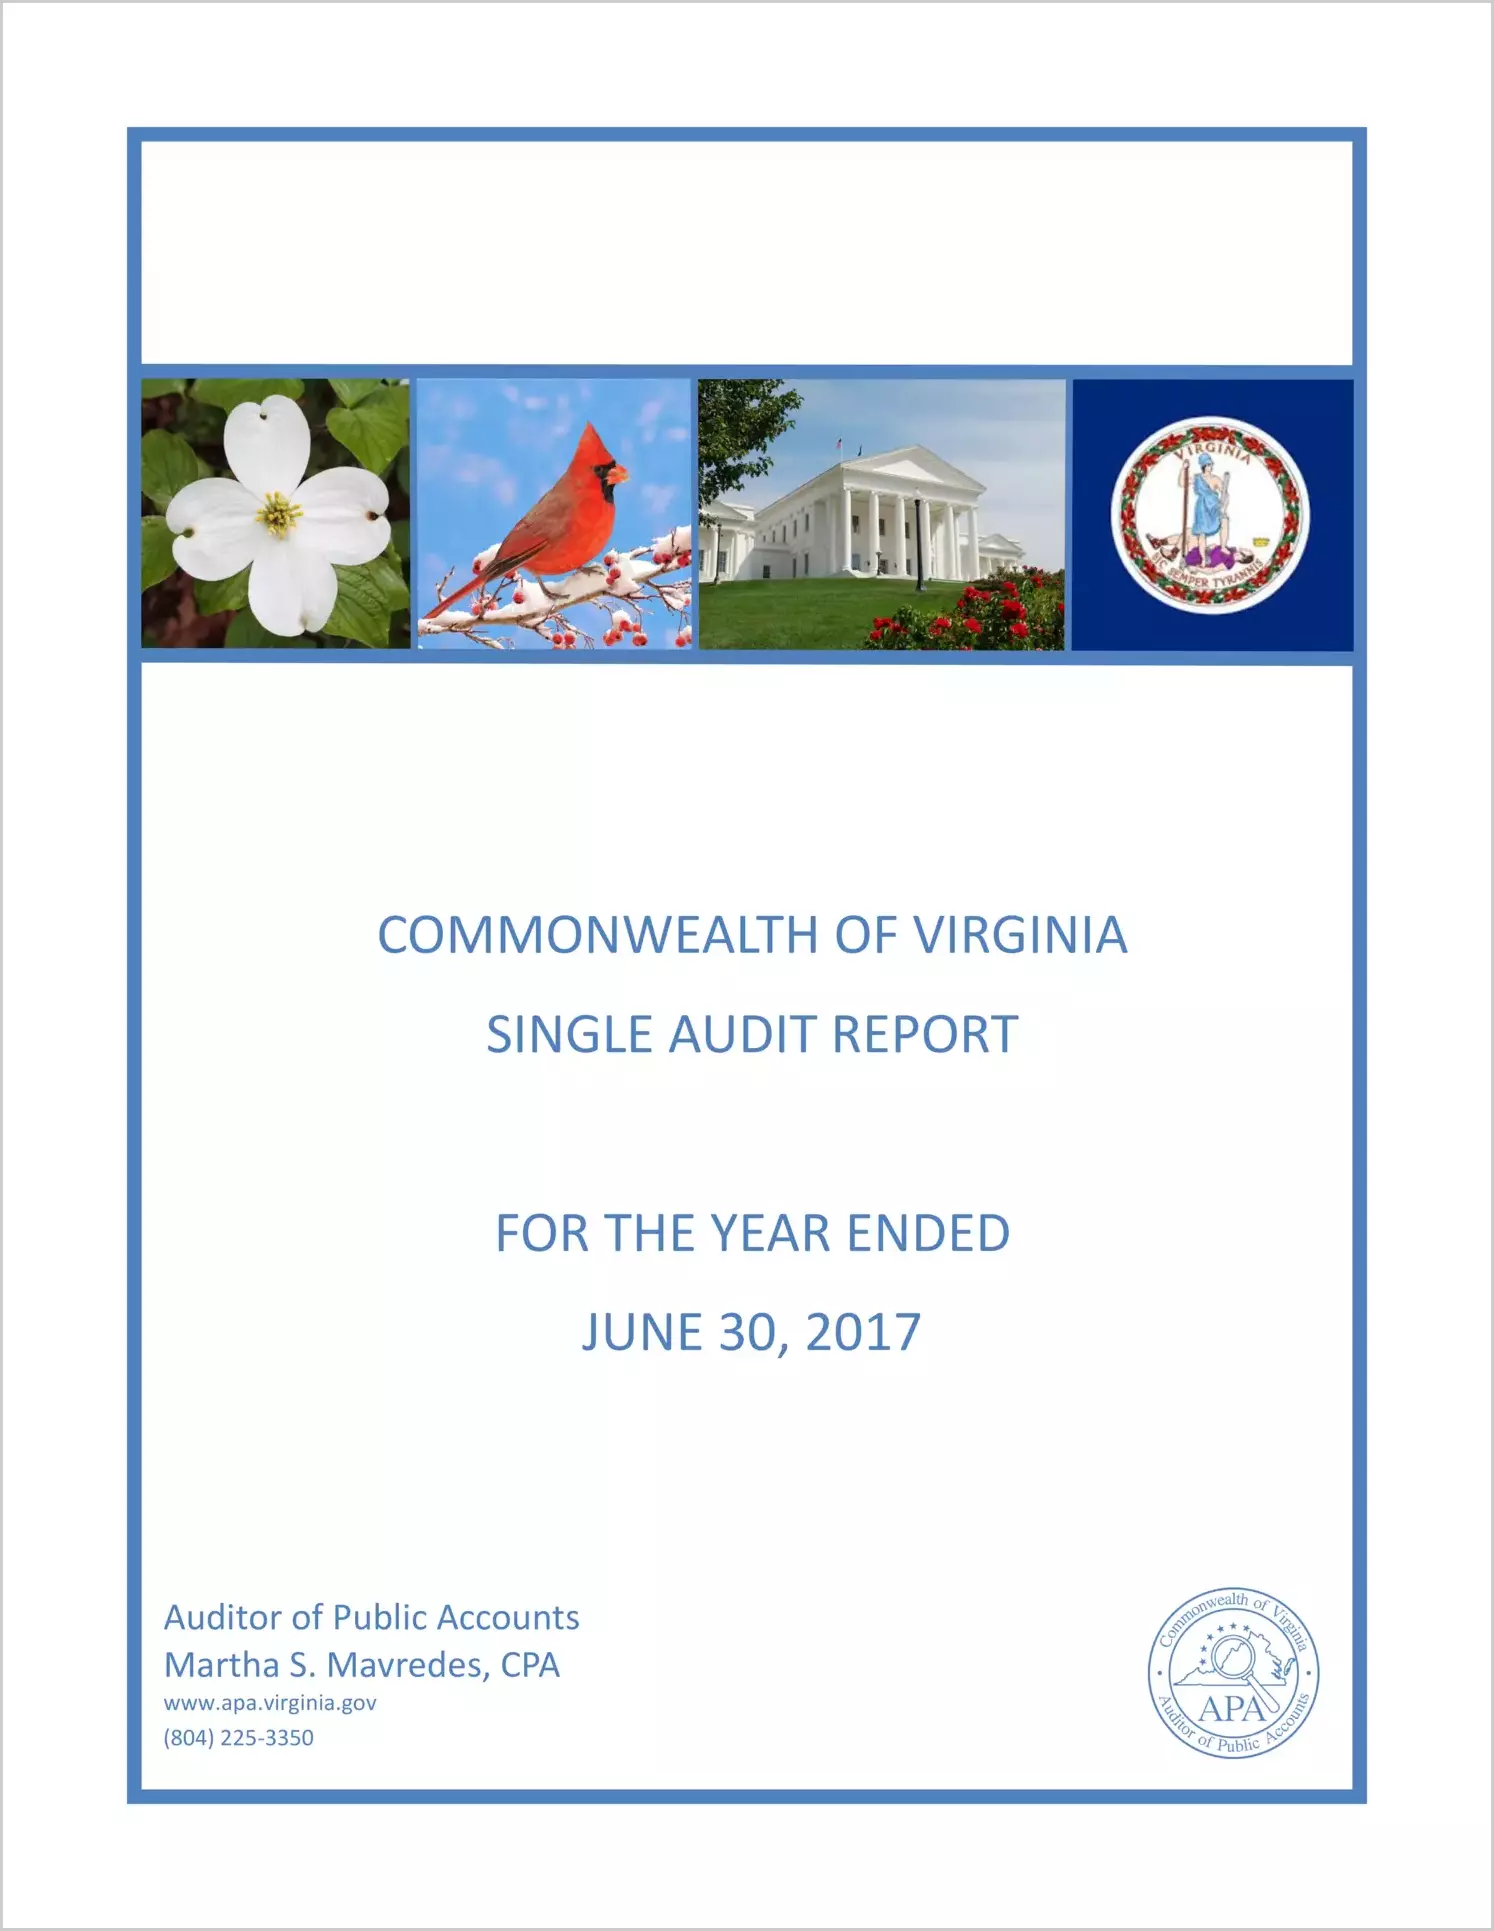 Commonwealth of Virginia Single Audit Report for the Year Ended June 30, 2017